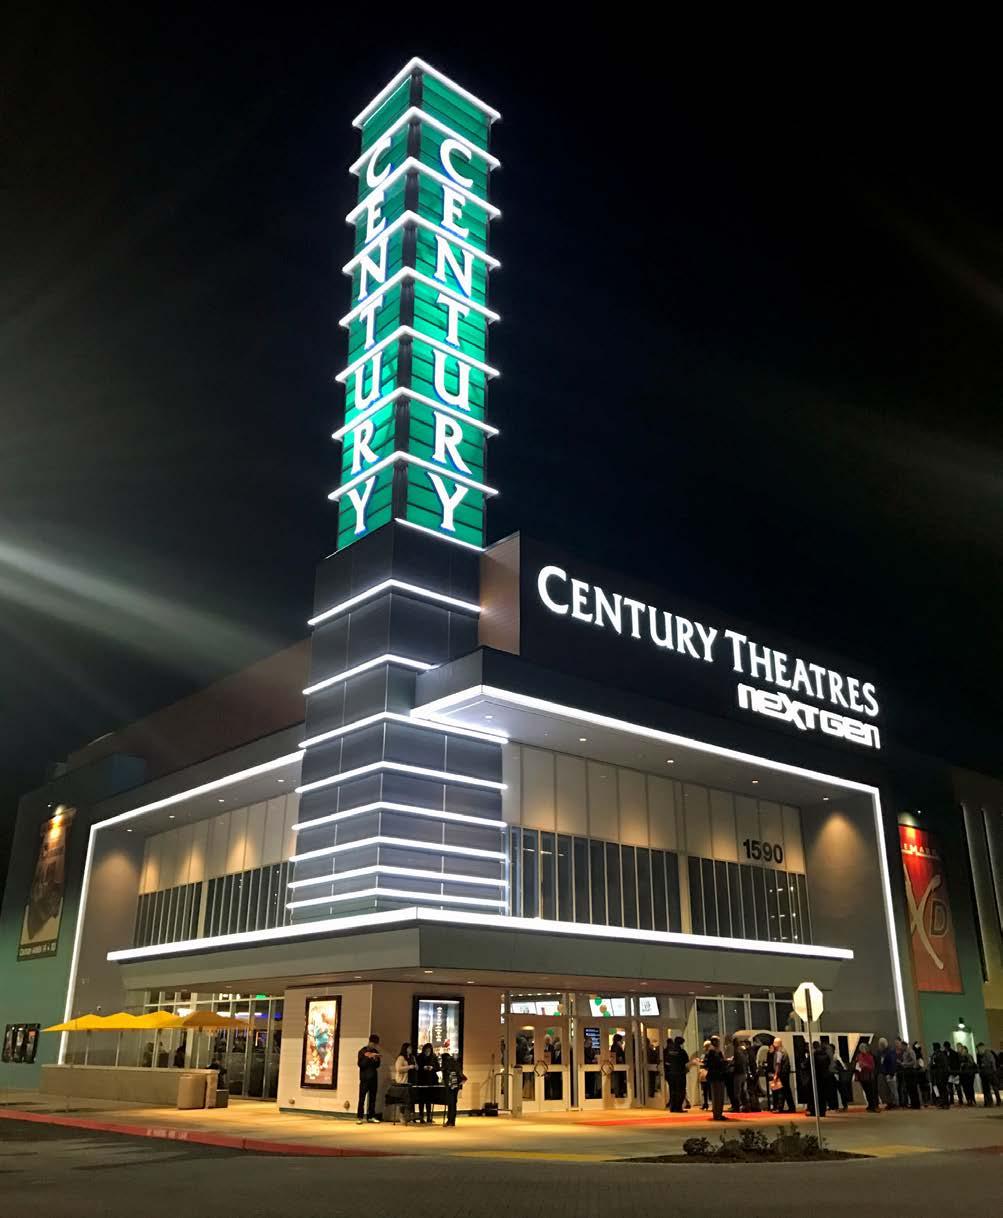 Century Theatre NEW THEATER The new Century Theatre has 14 screening rooms and 1,650